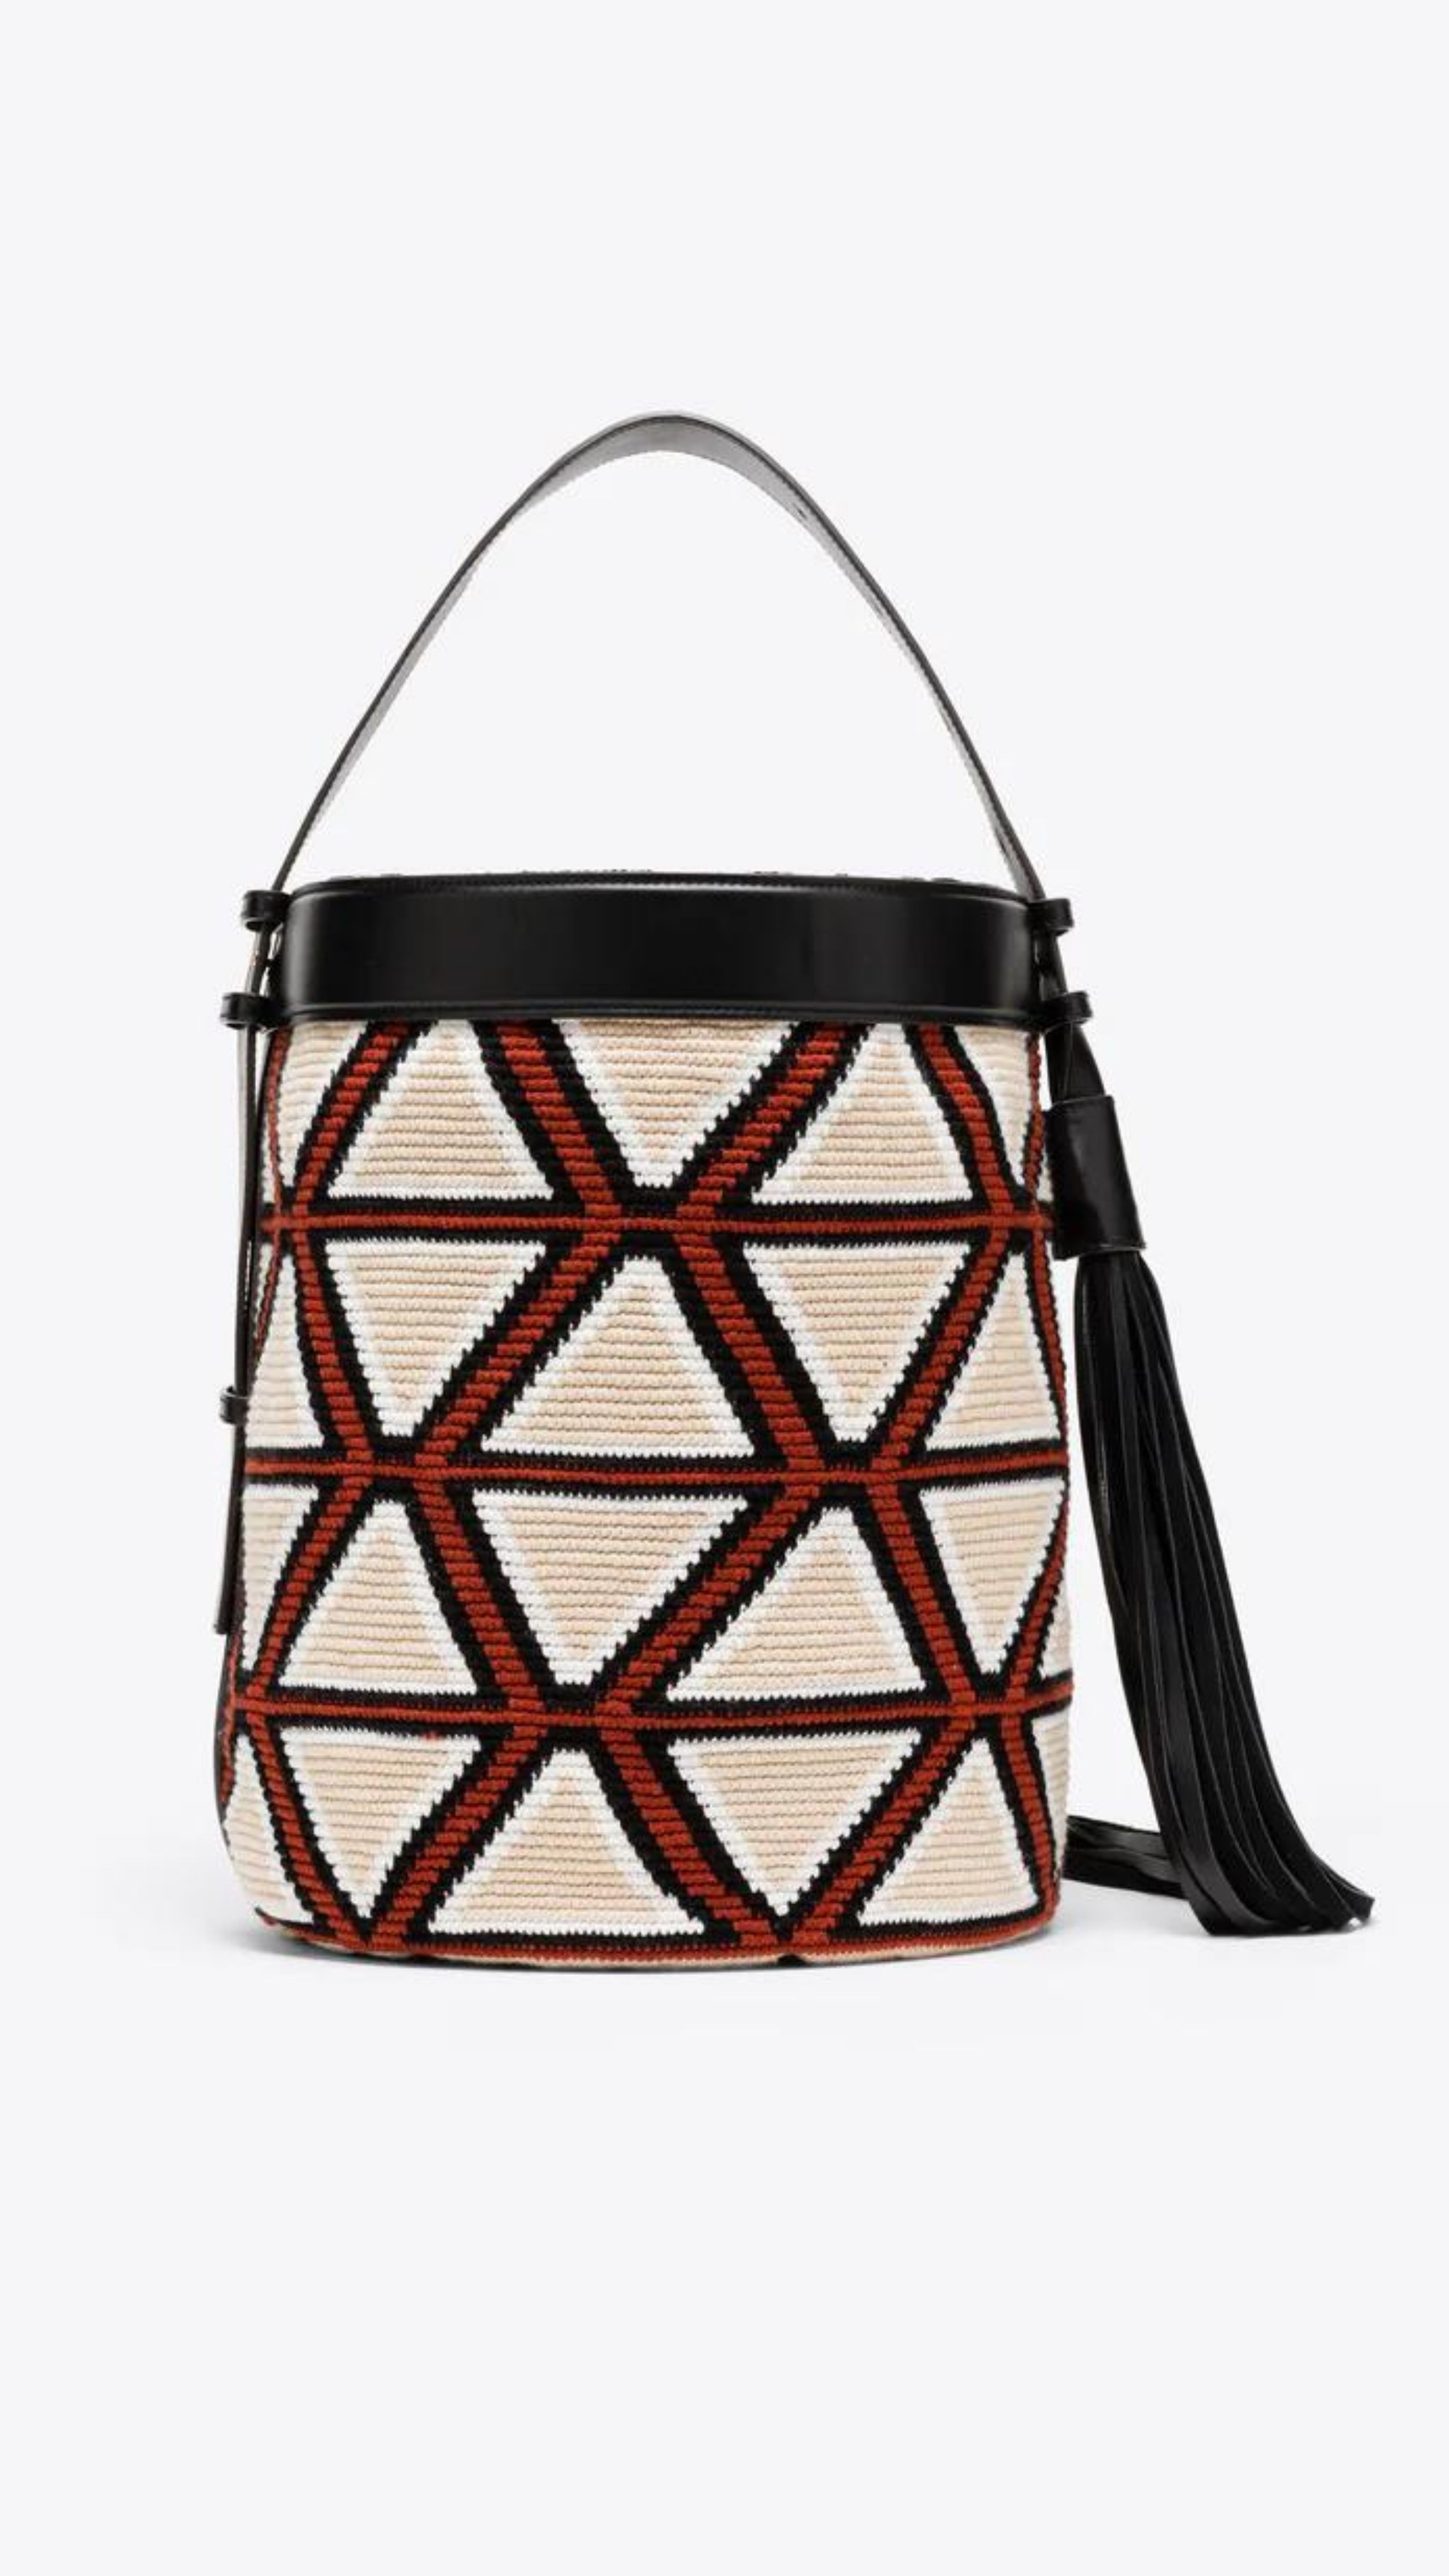 AZ Factory Colville Molly Molloy Lucinda Chambers, WOVEN CABRAS BAG  The Cabras Bag is woven in Wayuu Colombian and finished with Italian leather craftsmanship. Its ecru and burgundy diamond pattern is enhanced with black leather trim and a long black tassel. Front view.